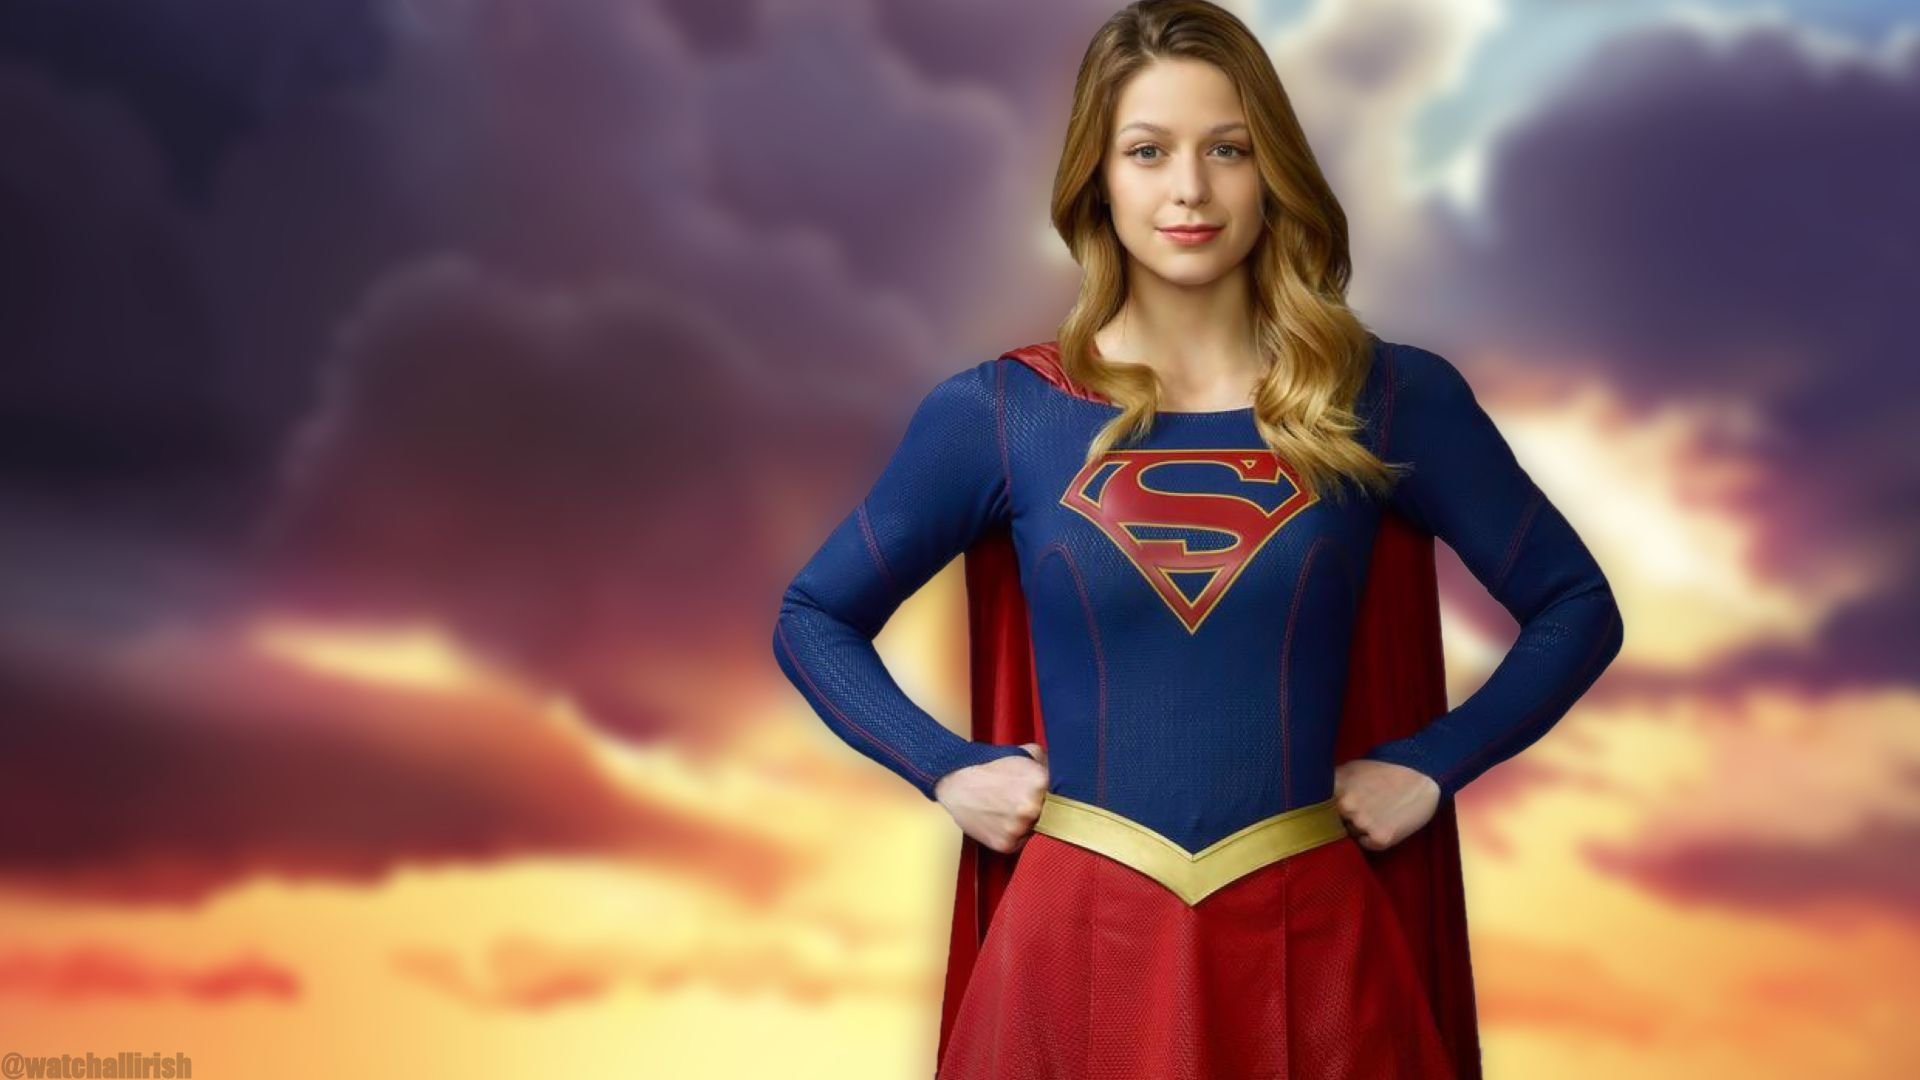 Supergirl Wallpapers HD Pictures Live HD Wallpaper HQ